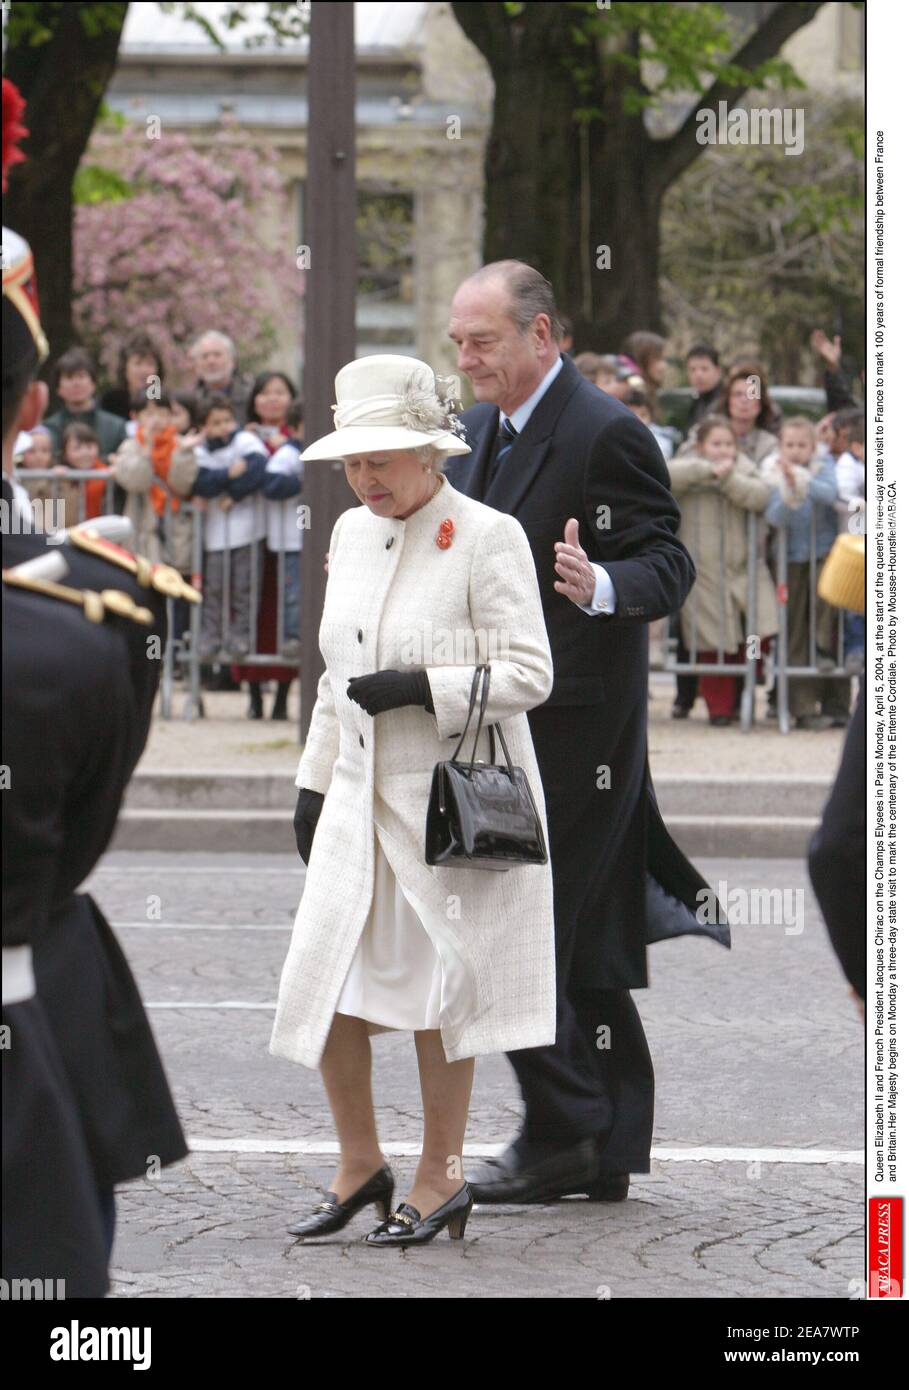 Britian's Queen Elizabeth II and French President Jacques Chirac on the Champs Elysees in Paris Monday, April 5, 2004, at the start of the queen's three-day state visit to France to mark 100 years of formal friendship between France and Britain.Her Majesty begins on Monday a three-day state visit to mark the centenary of the Entente Cordiale. Photo by Mousse-Hounsfield/ABACA. Stock Photo